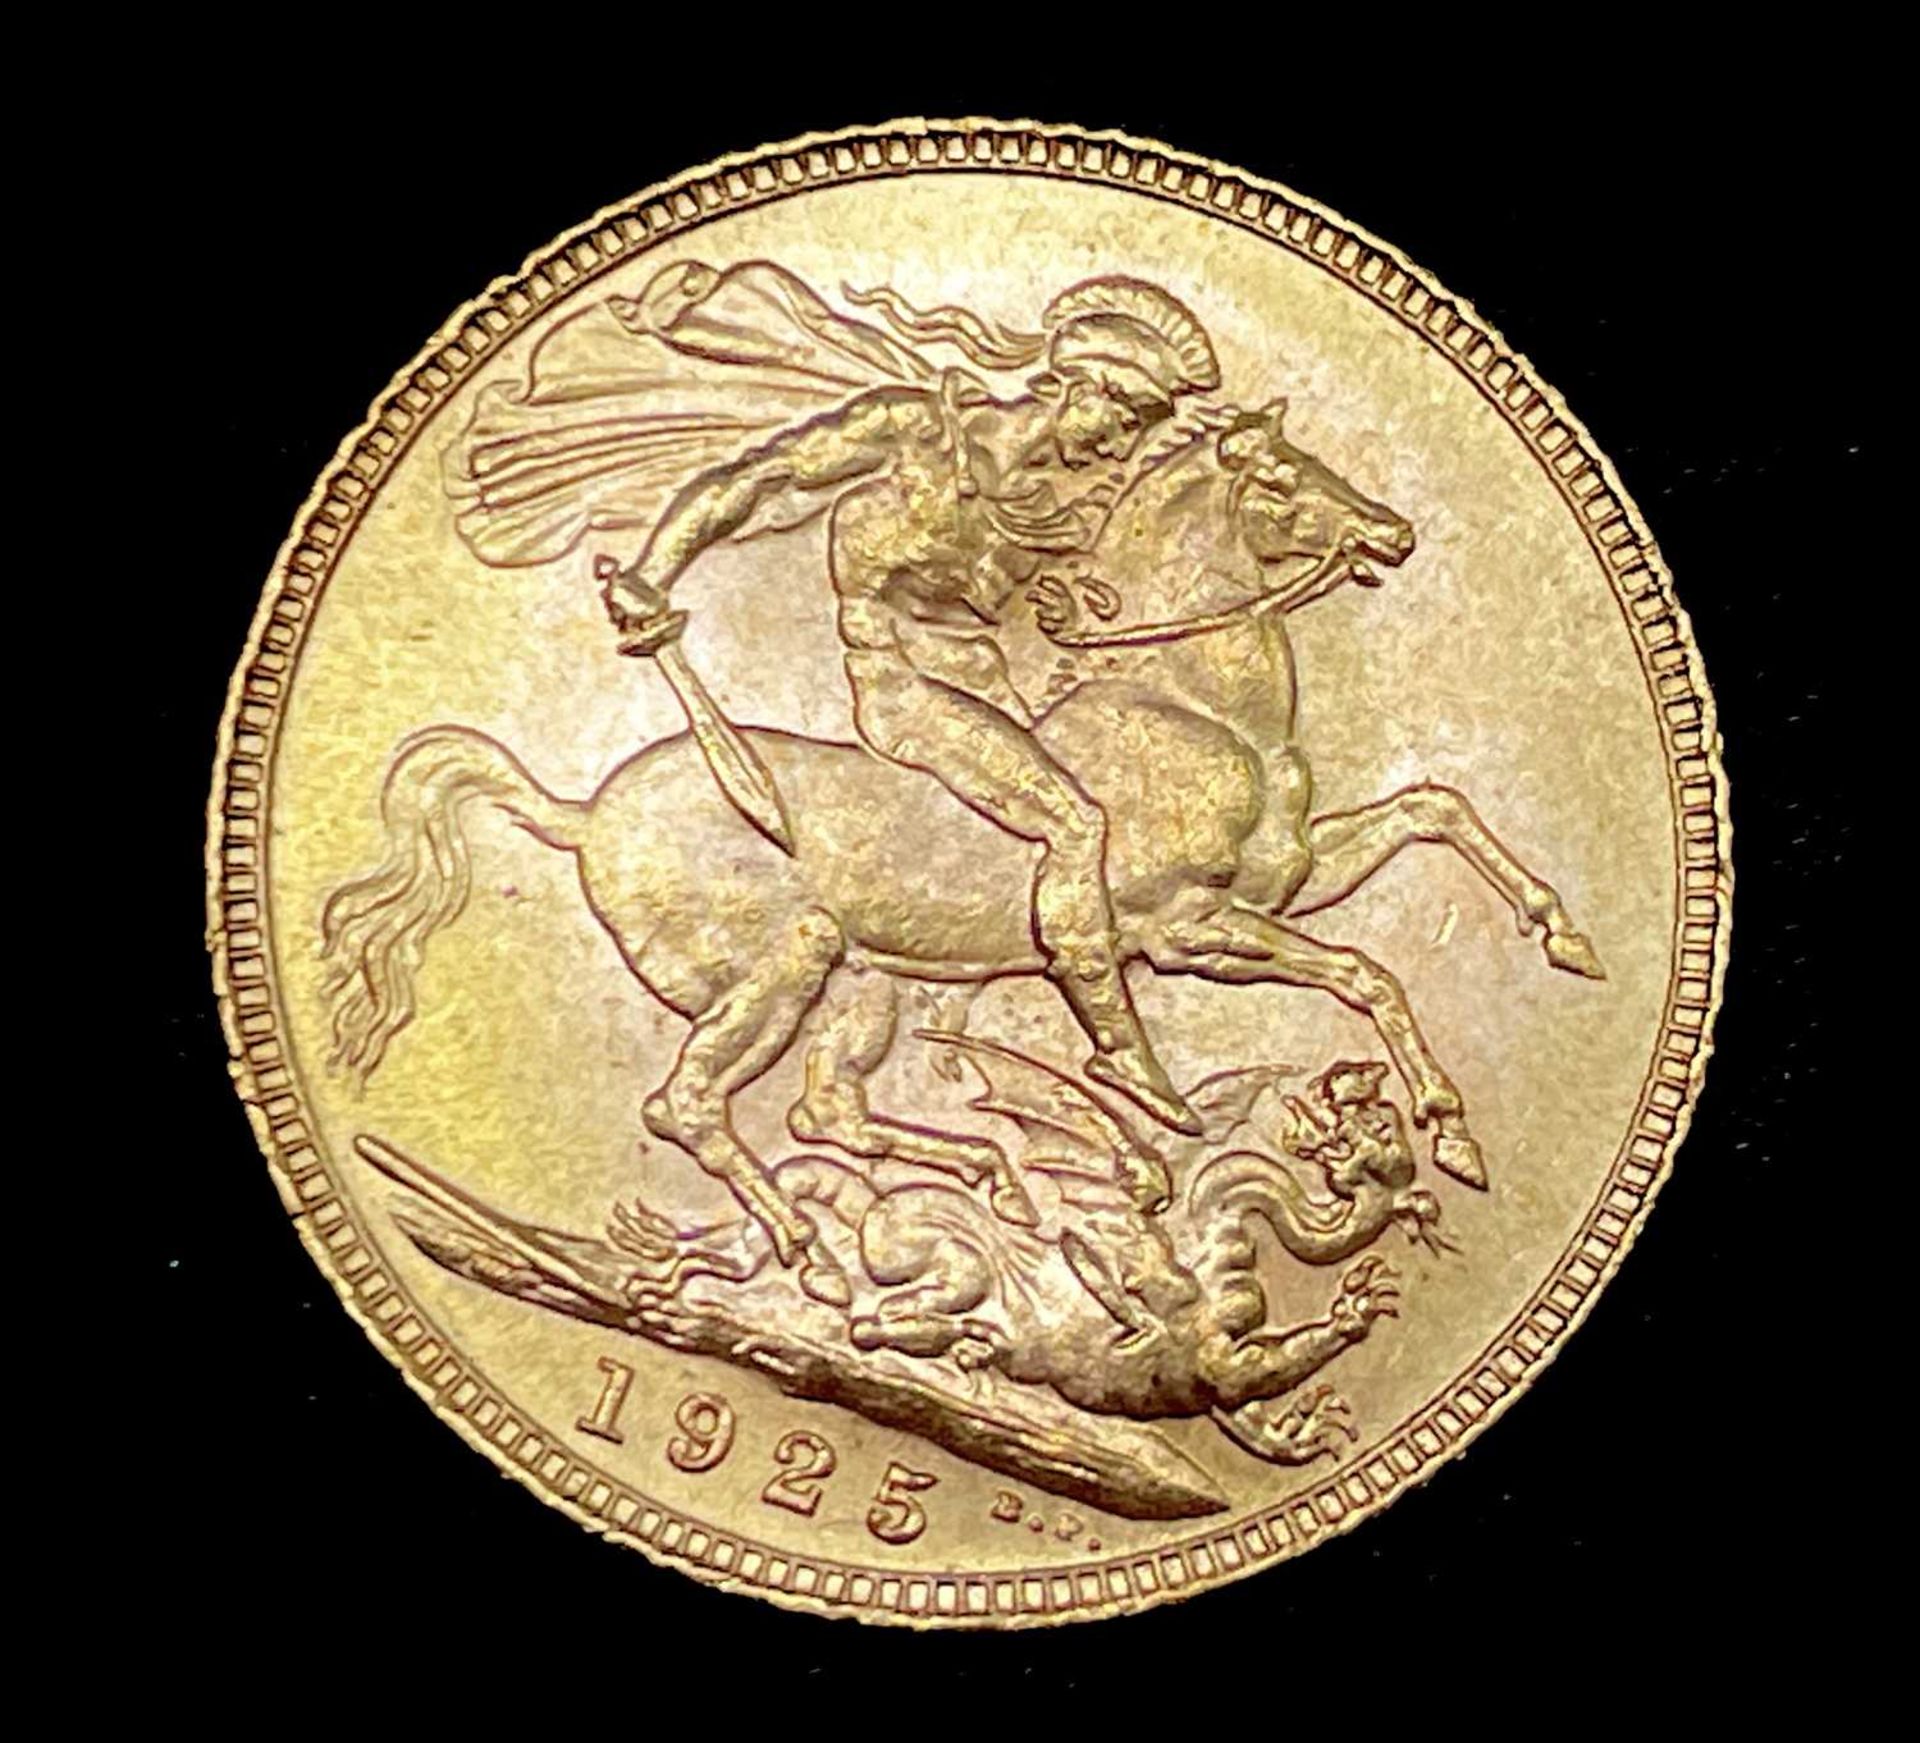 Great Britain Gold Sovereign 1925 EF George V Condition: please request a condition report if you - Image 2 of 2